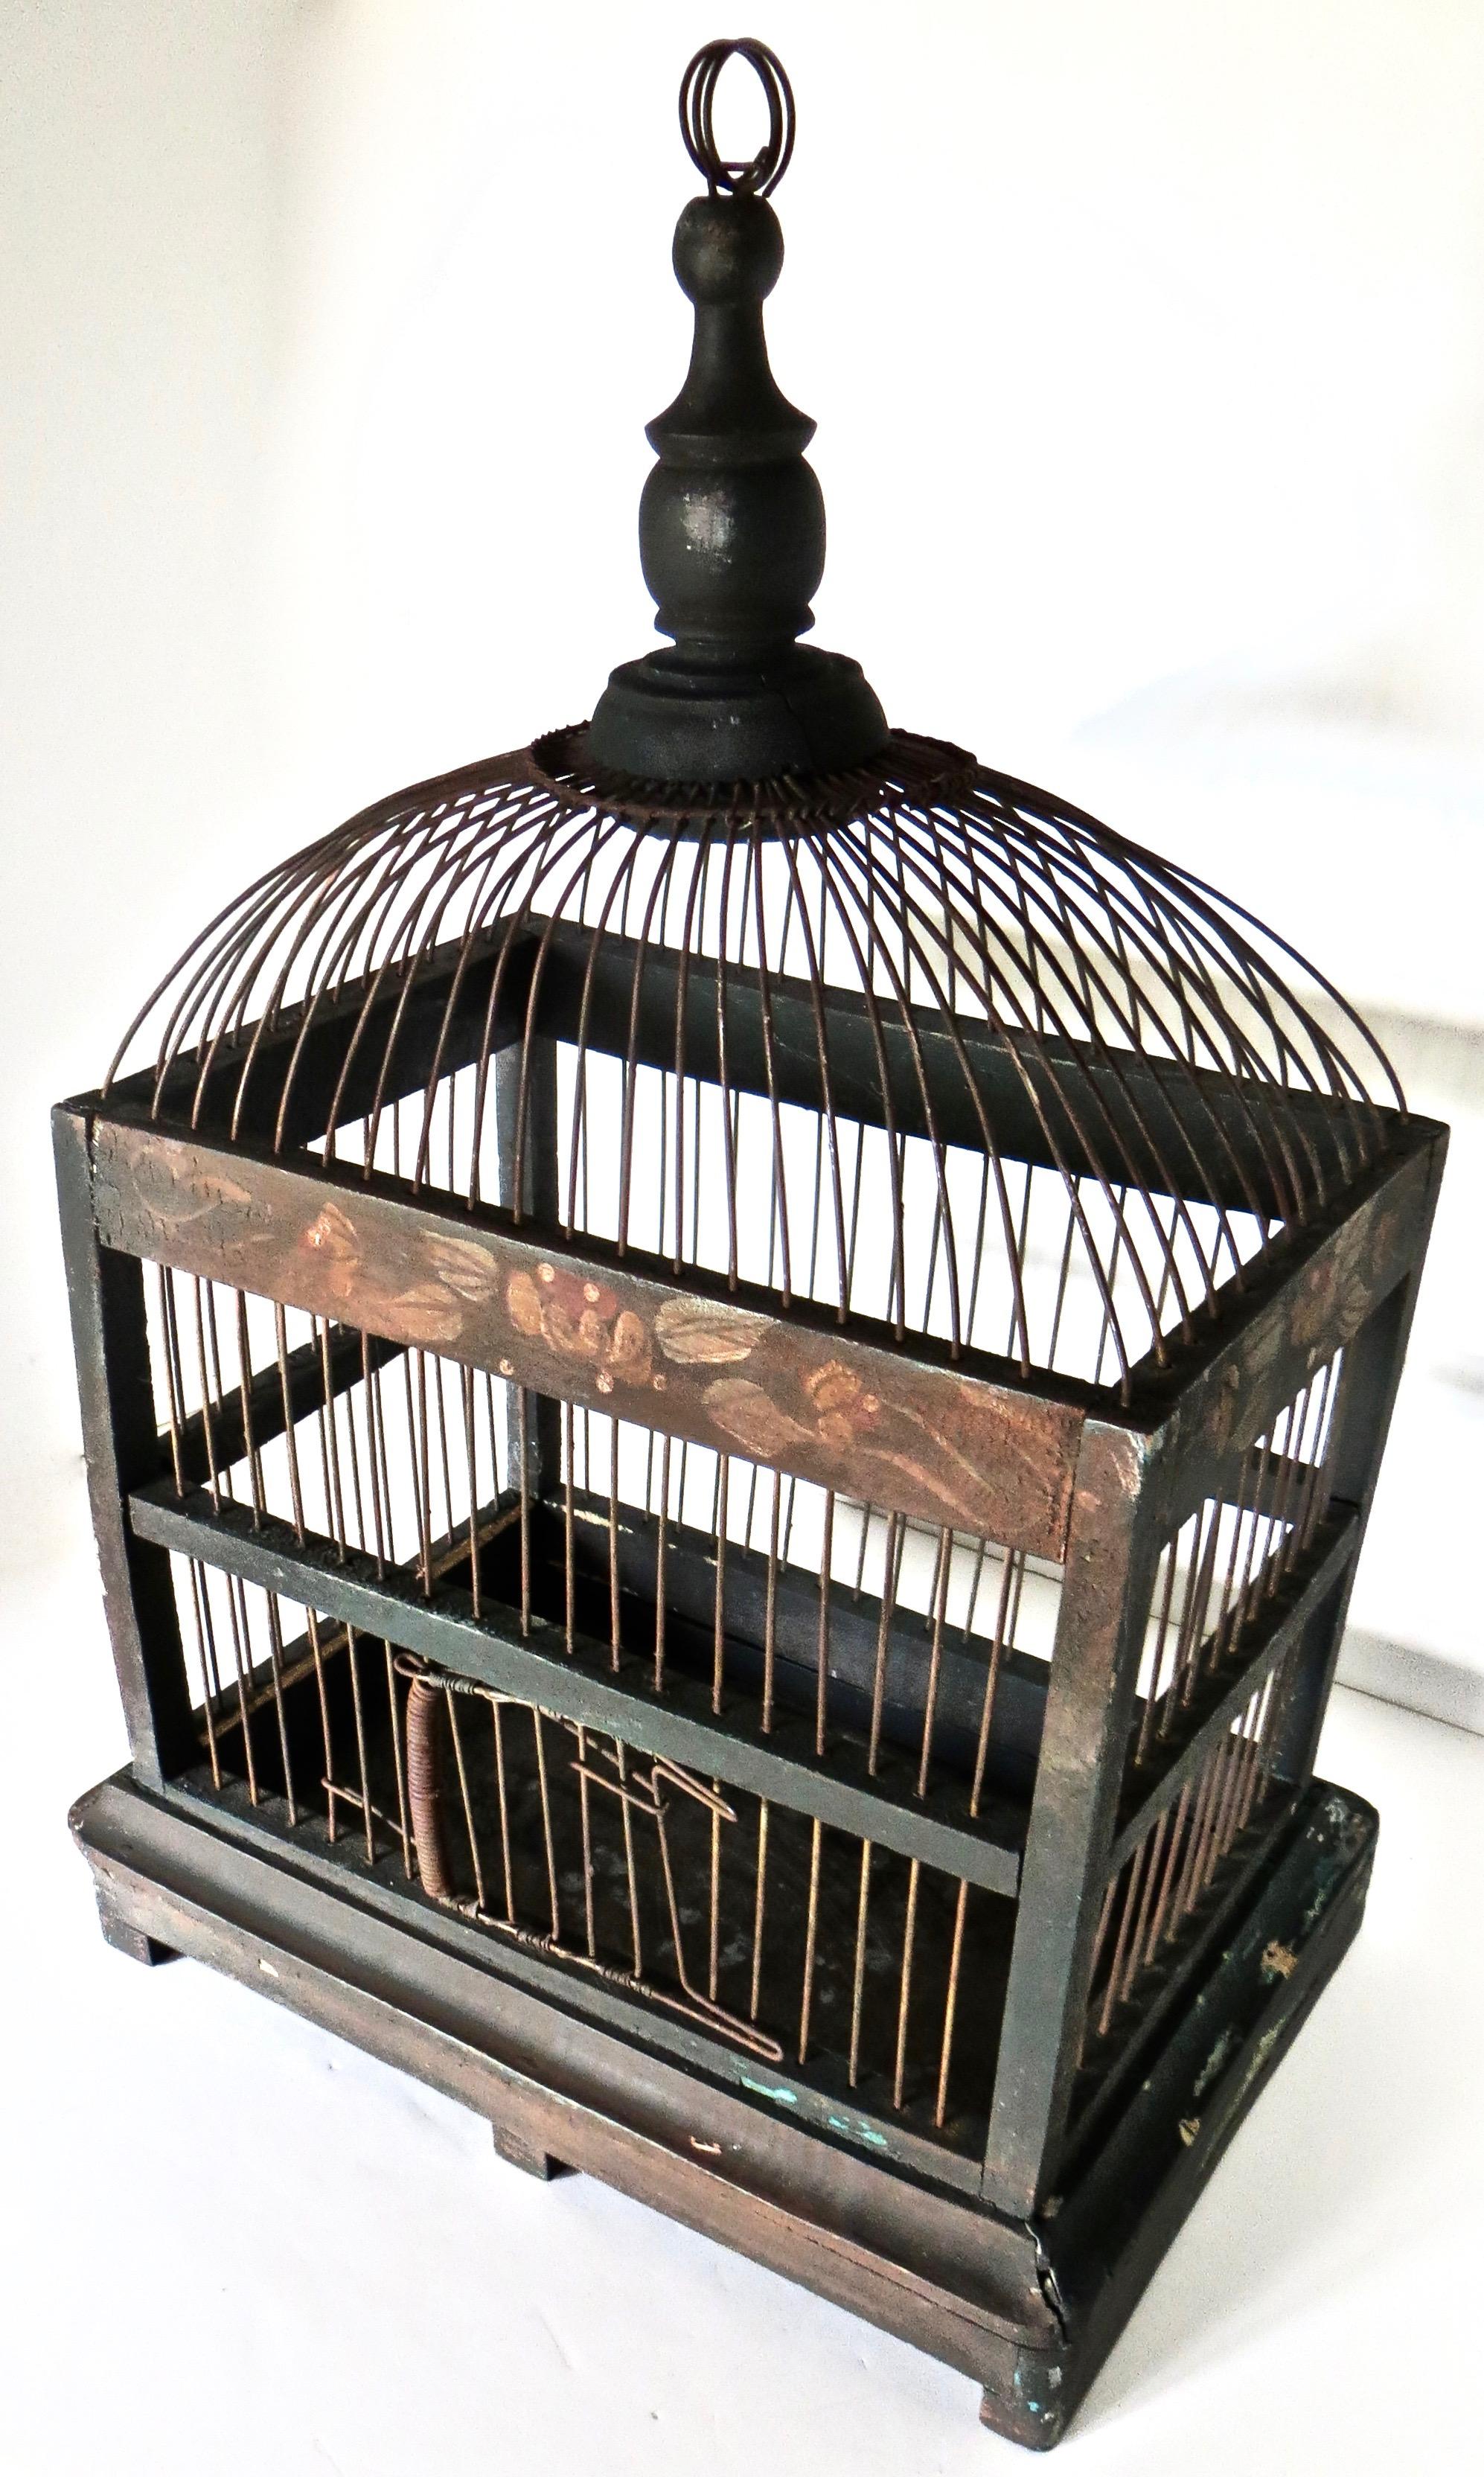 Hand made Folk Art American wire metal and painted wood birdcage, probably from Pennsylvania circa 1905. Having a rectangular body with a dome top; suitable for hanging, or surface decorative presentation, this birdcage is functional albeit it lacks